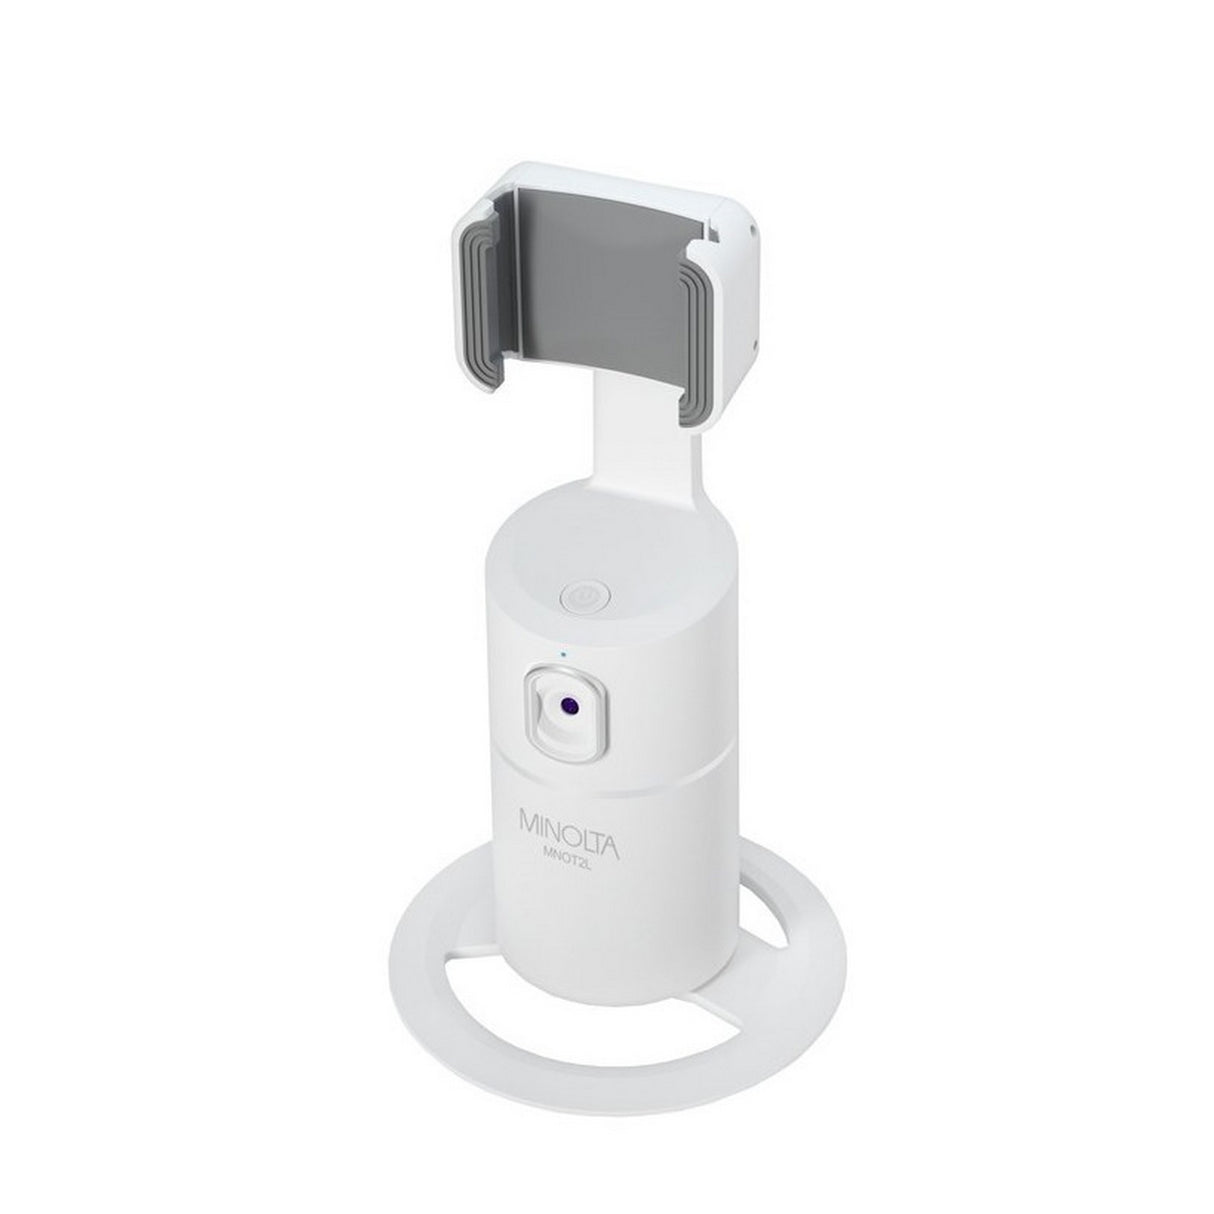 Minolta MNOT2L Smart Face-Tracking Mount System, Lithium-Ion Powered, White